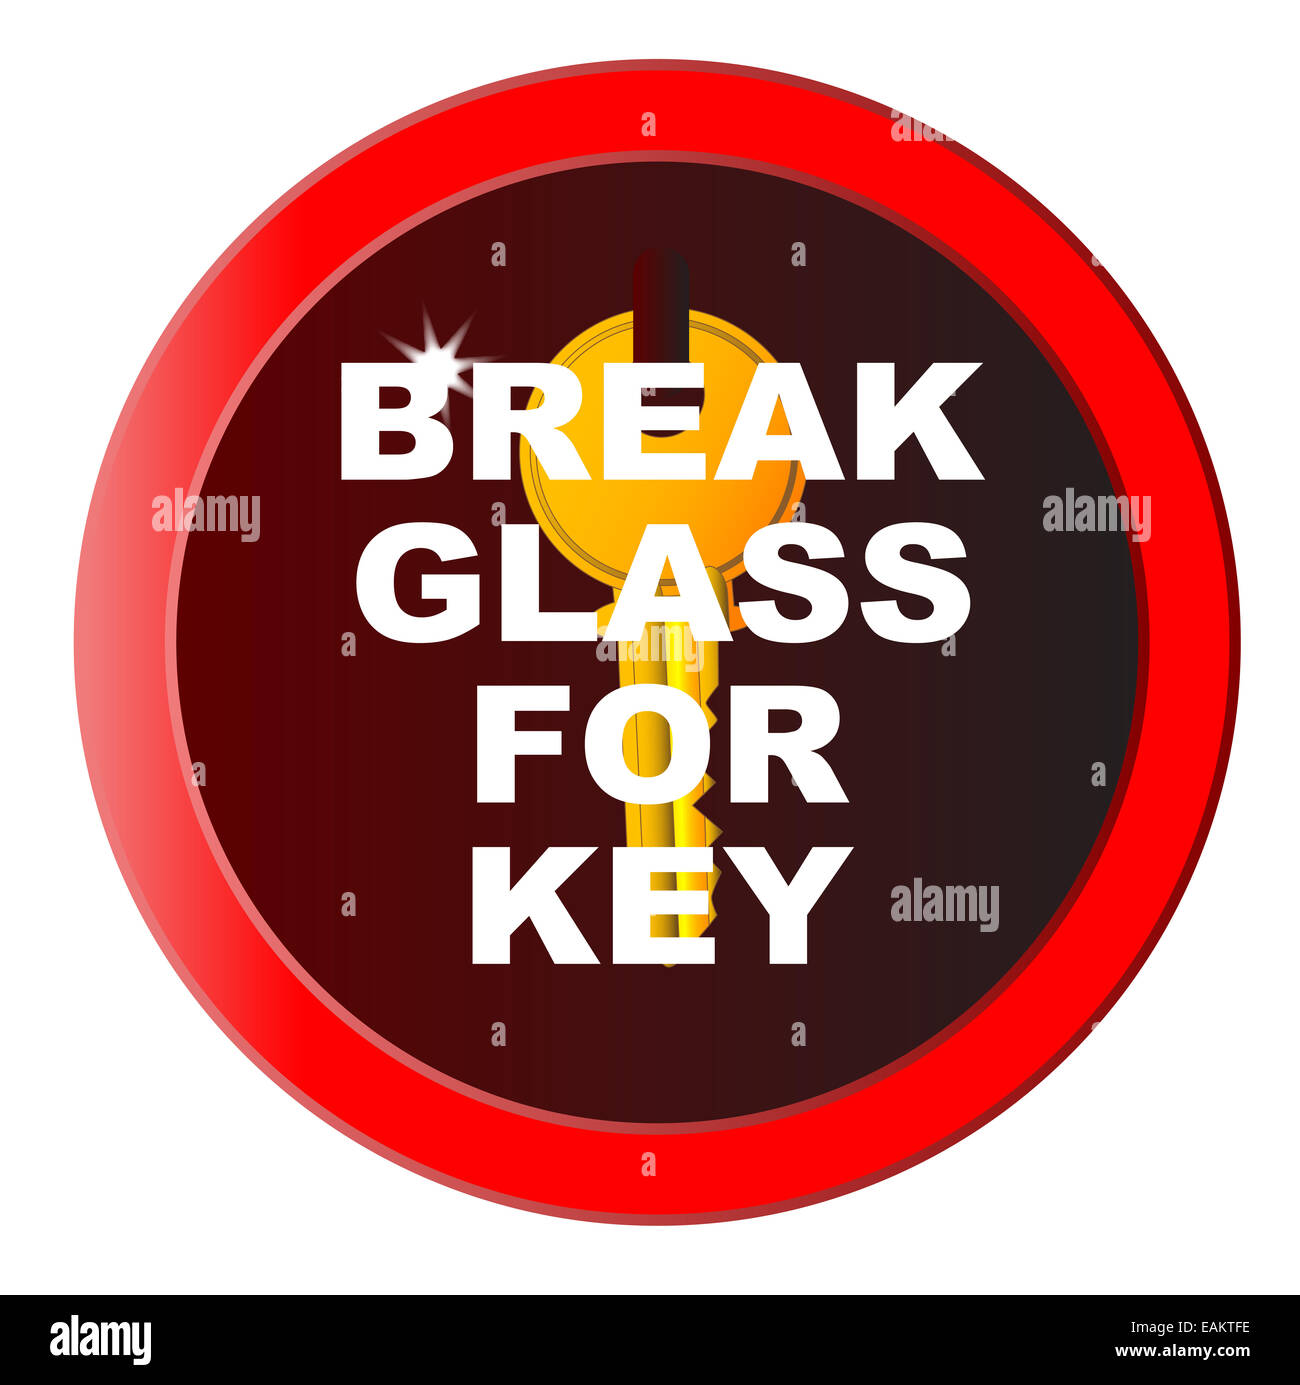 Break Glass For Key wall box over a white background Stock Photo